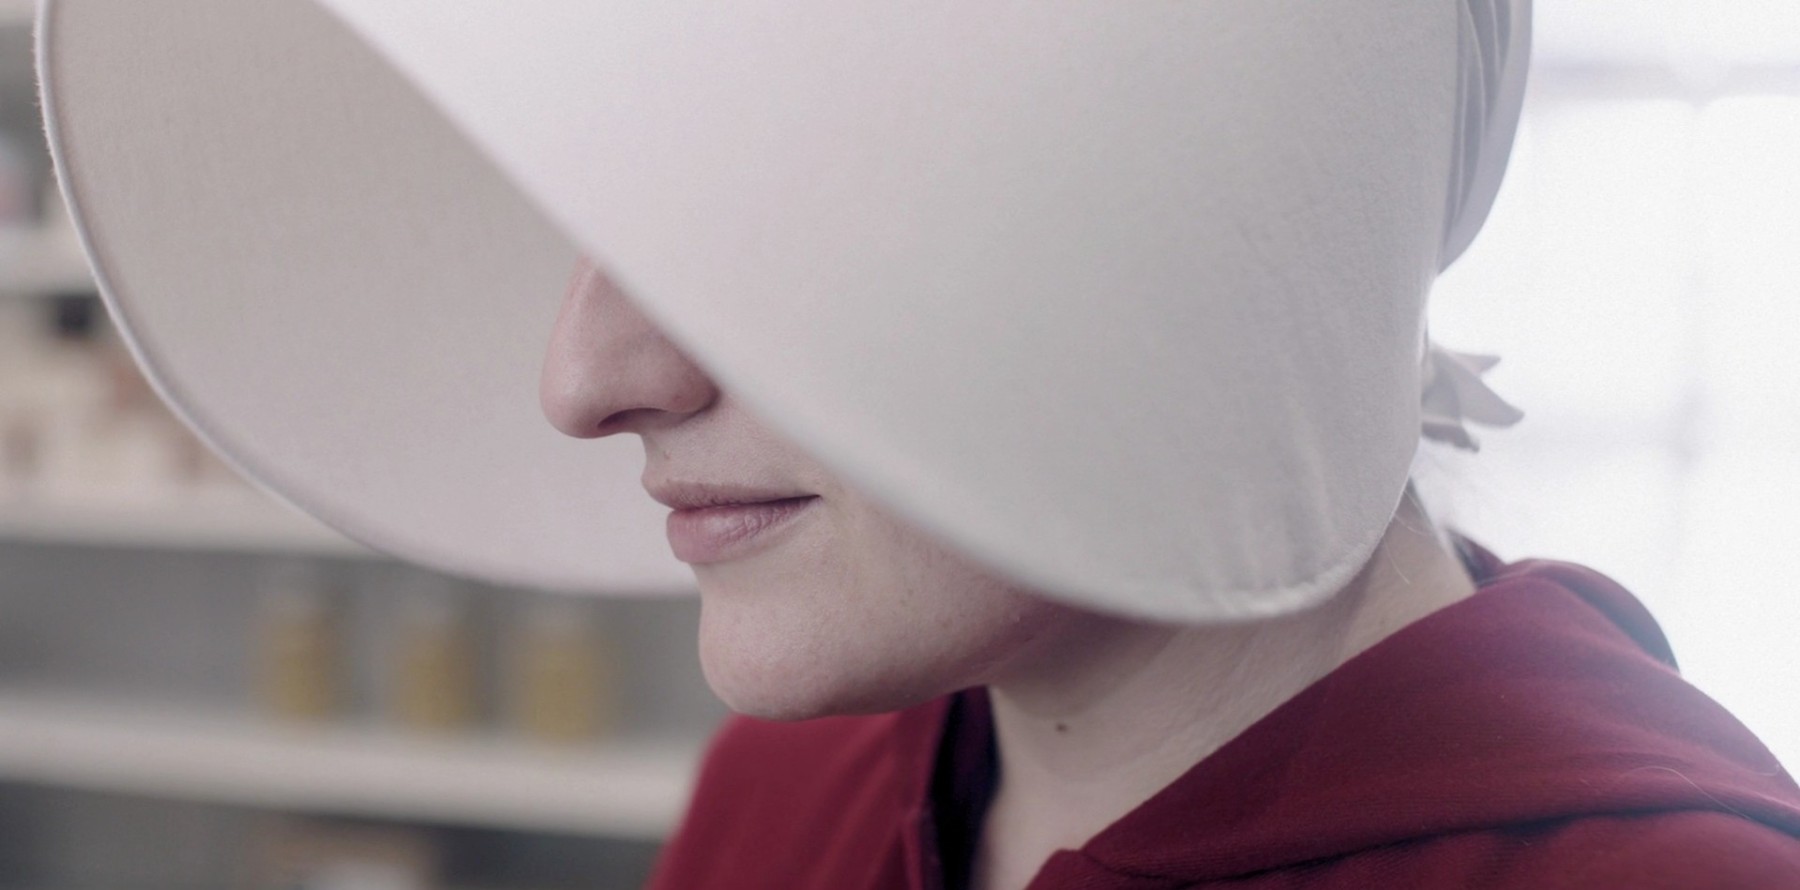 The Handmaid’s Tale – Season 3, Episode 8: “Unfit” – Father Son Holy Gore